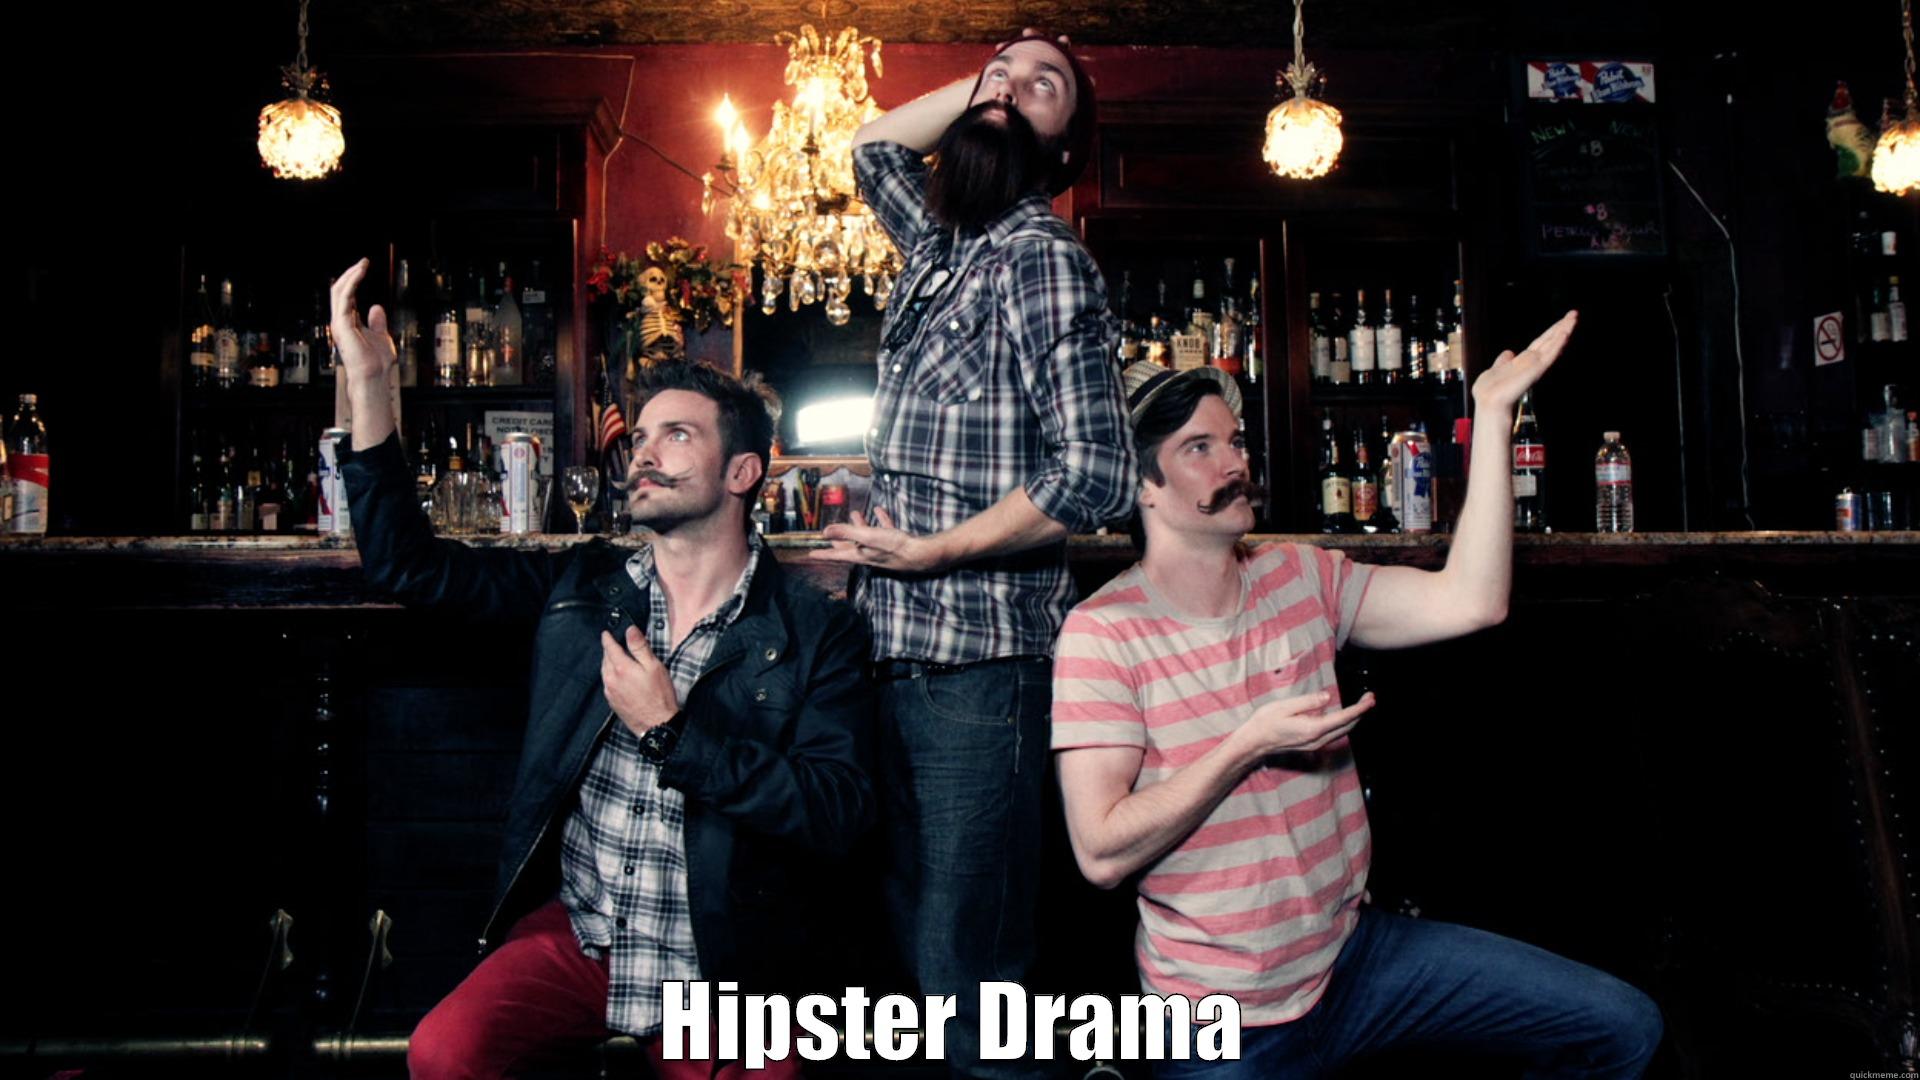 Hipster pic from the funniest Hipster vid of all time...

Hipster- The Get Down
https://www.youtube.com/watch?v=mzYHHl24iDo